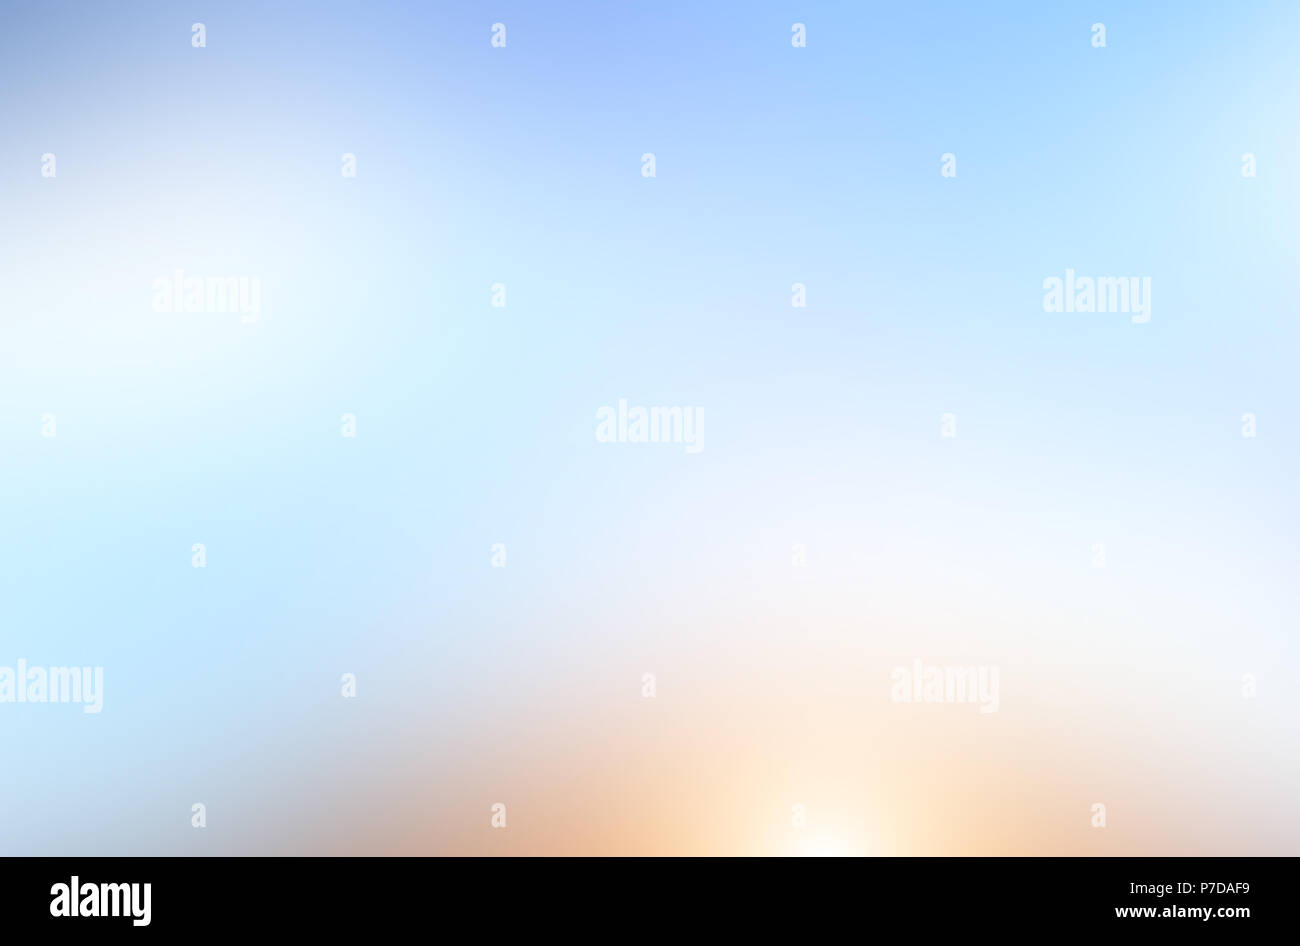 Abstract Blurred gradient blue and yellow background, for your mockup and template design. Stock Photo